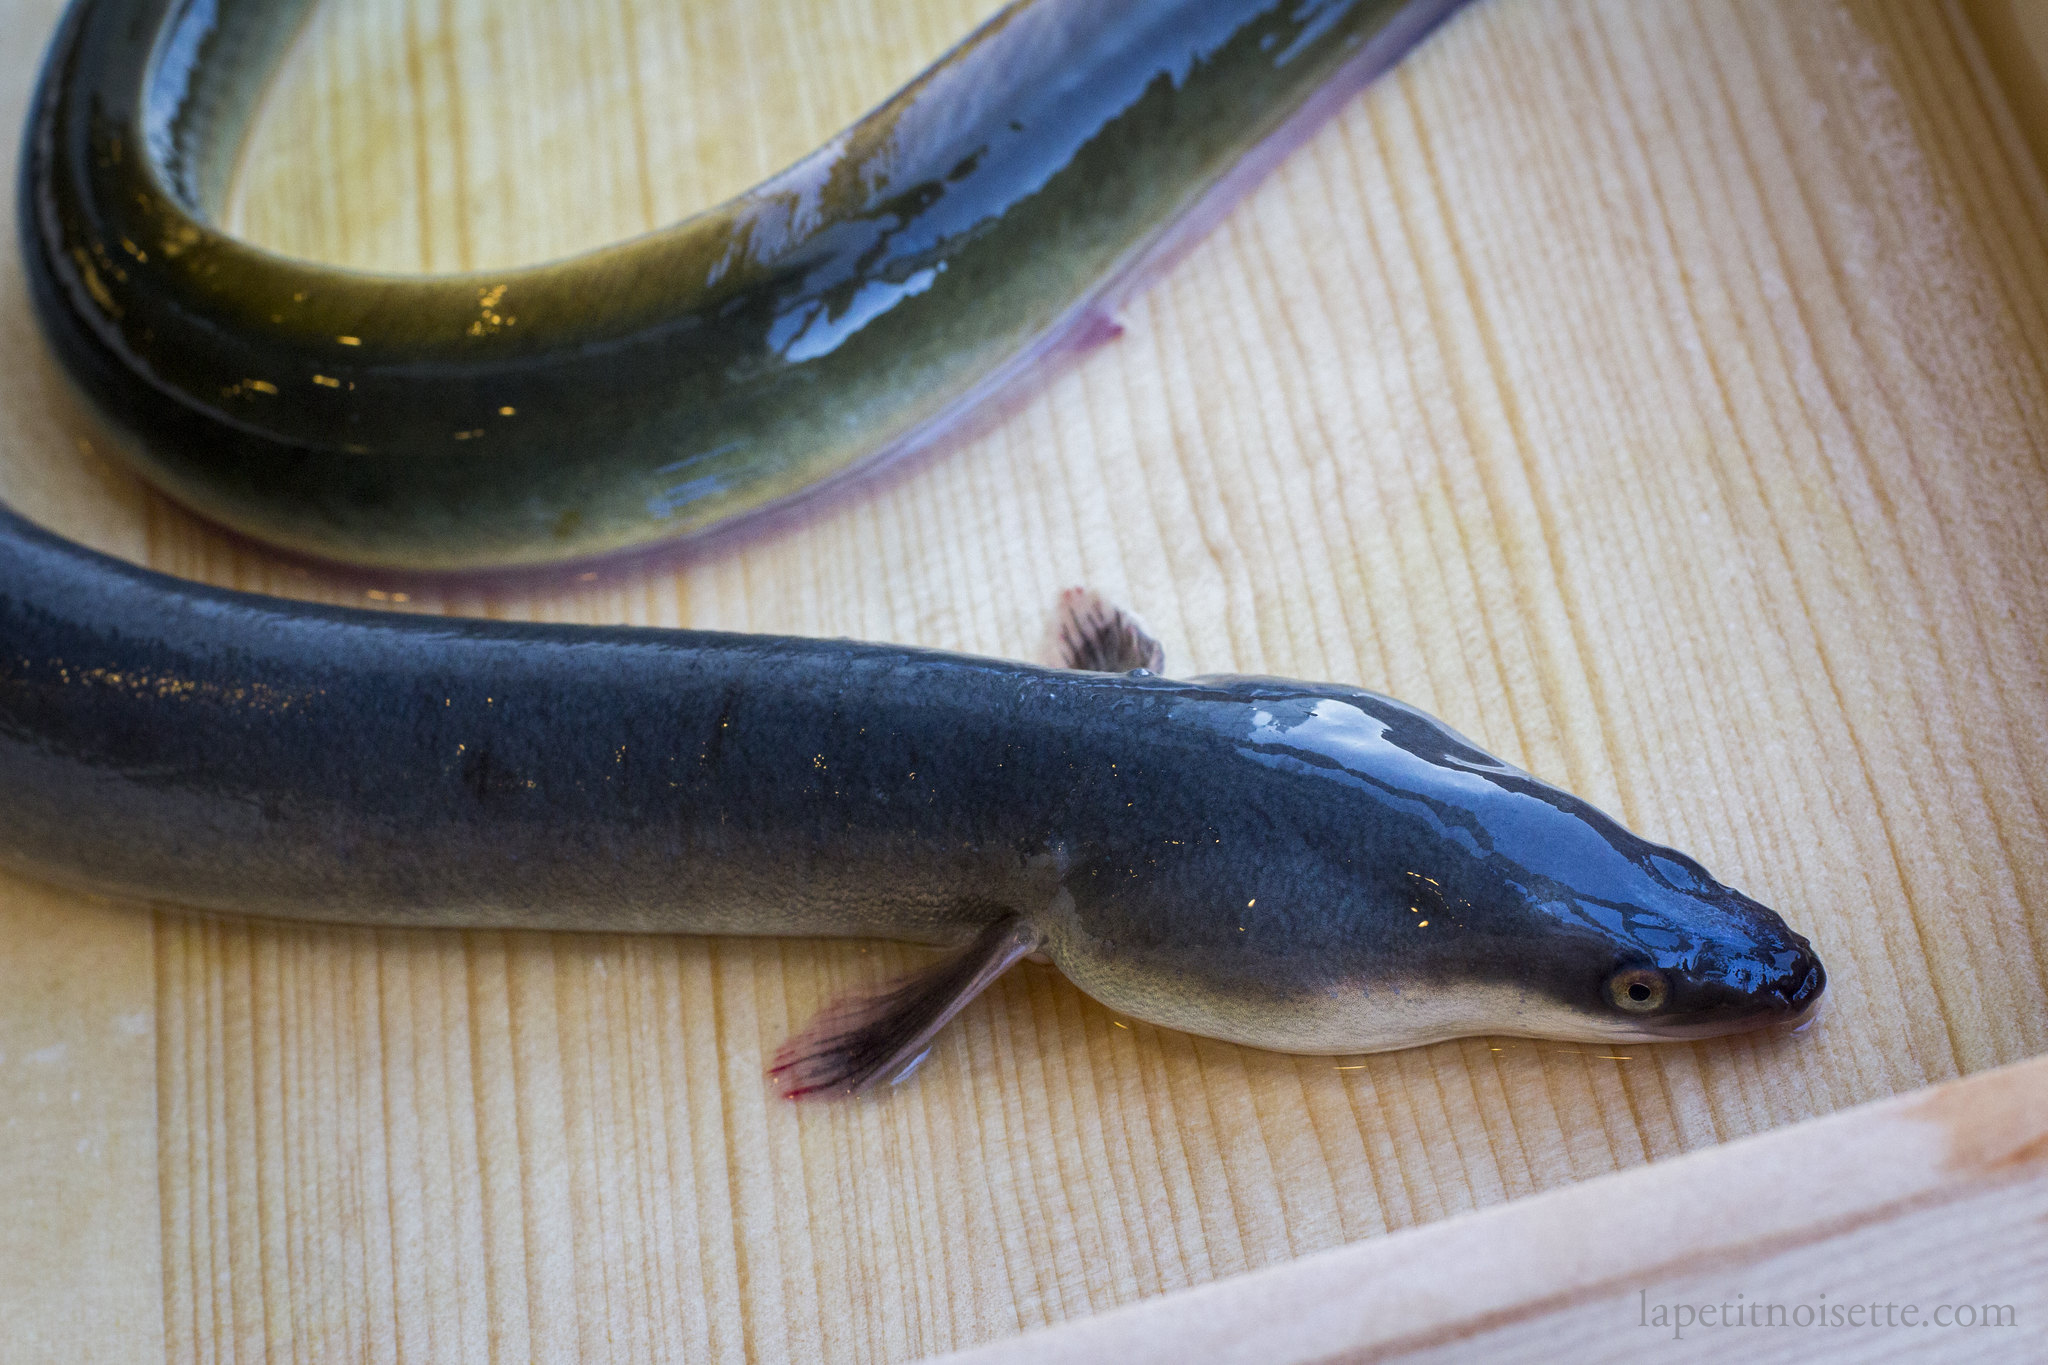 A wild eel with a green back and yellow belly compared to a farmed eel with a blue black back and white belly.